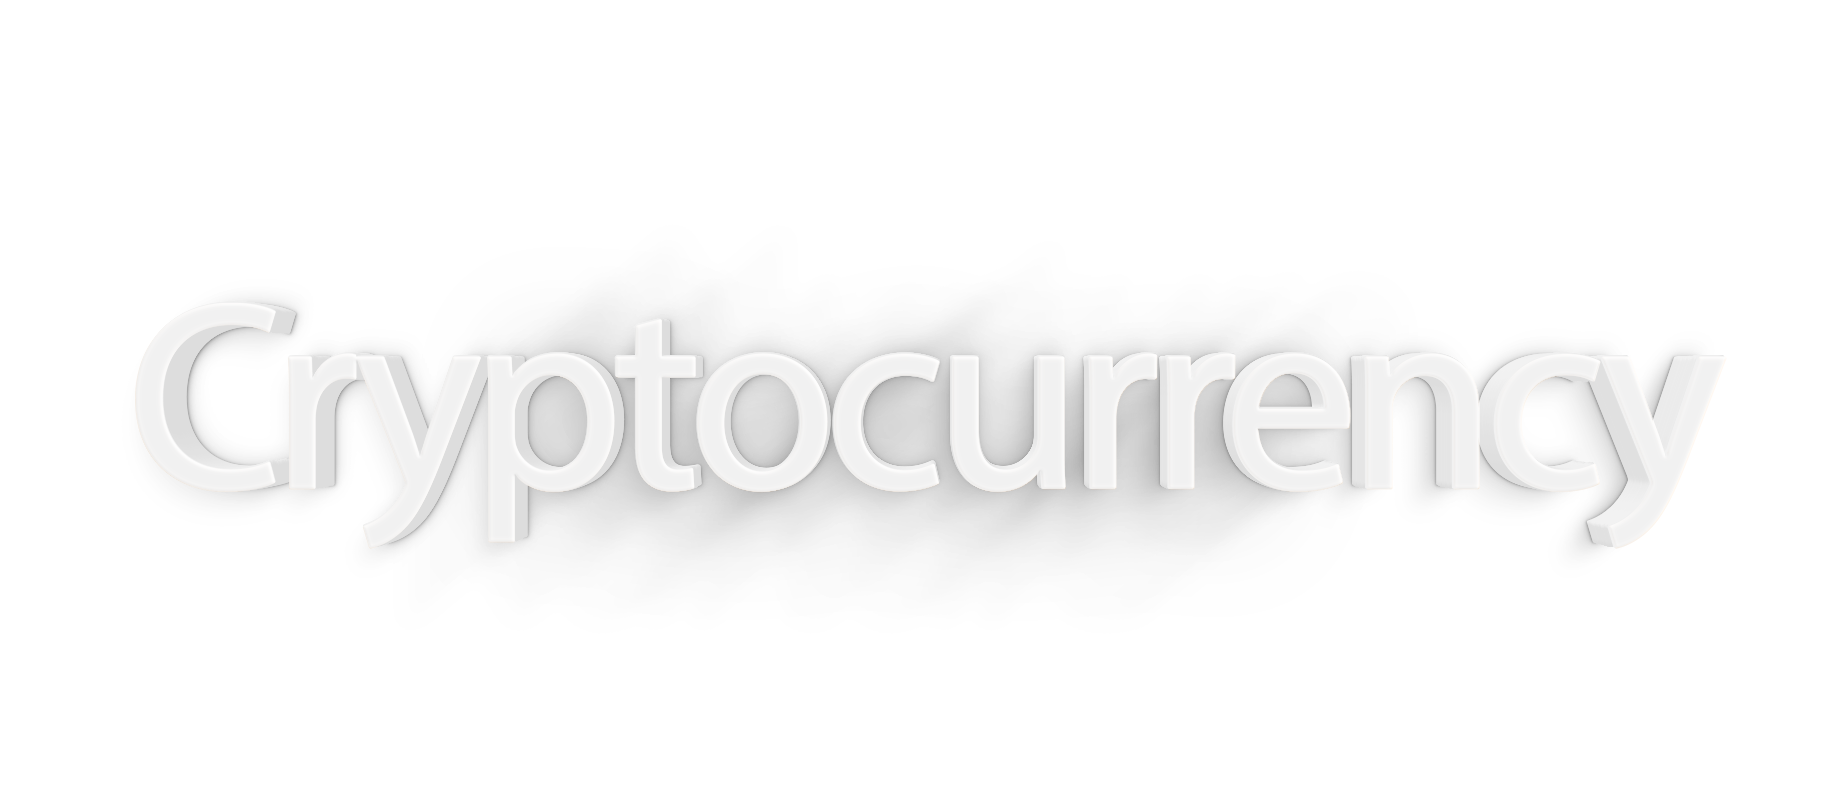 Cryptocurrency png, word Cryptocurrency png, Cryptocurrency word png, Cryptocurrency text png, Cryptocurrency font png, word Cryptocurrency text effects typography PNG transparent images